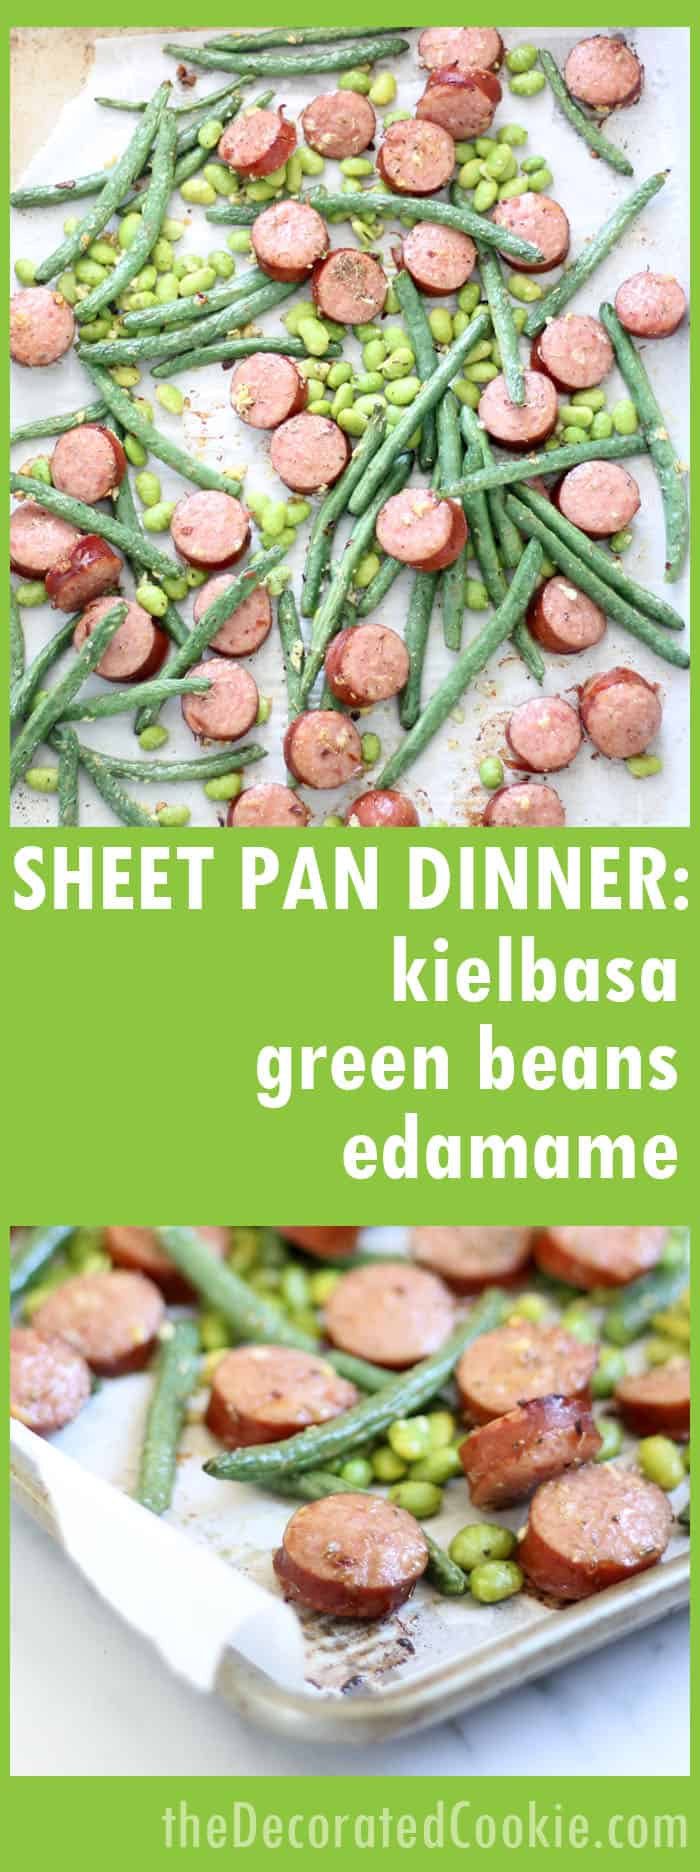 This kielbasa and green beans sheet pan dinner with edamame/soy beans is a delicious, low-carb, easy weeknight dinner idea that takes less than thirty minutes to make. Low-carb, gluten-free, keto dinner ideas. Video recipe included. 